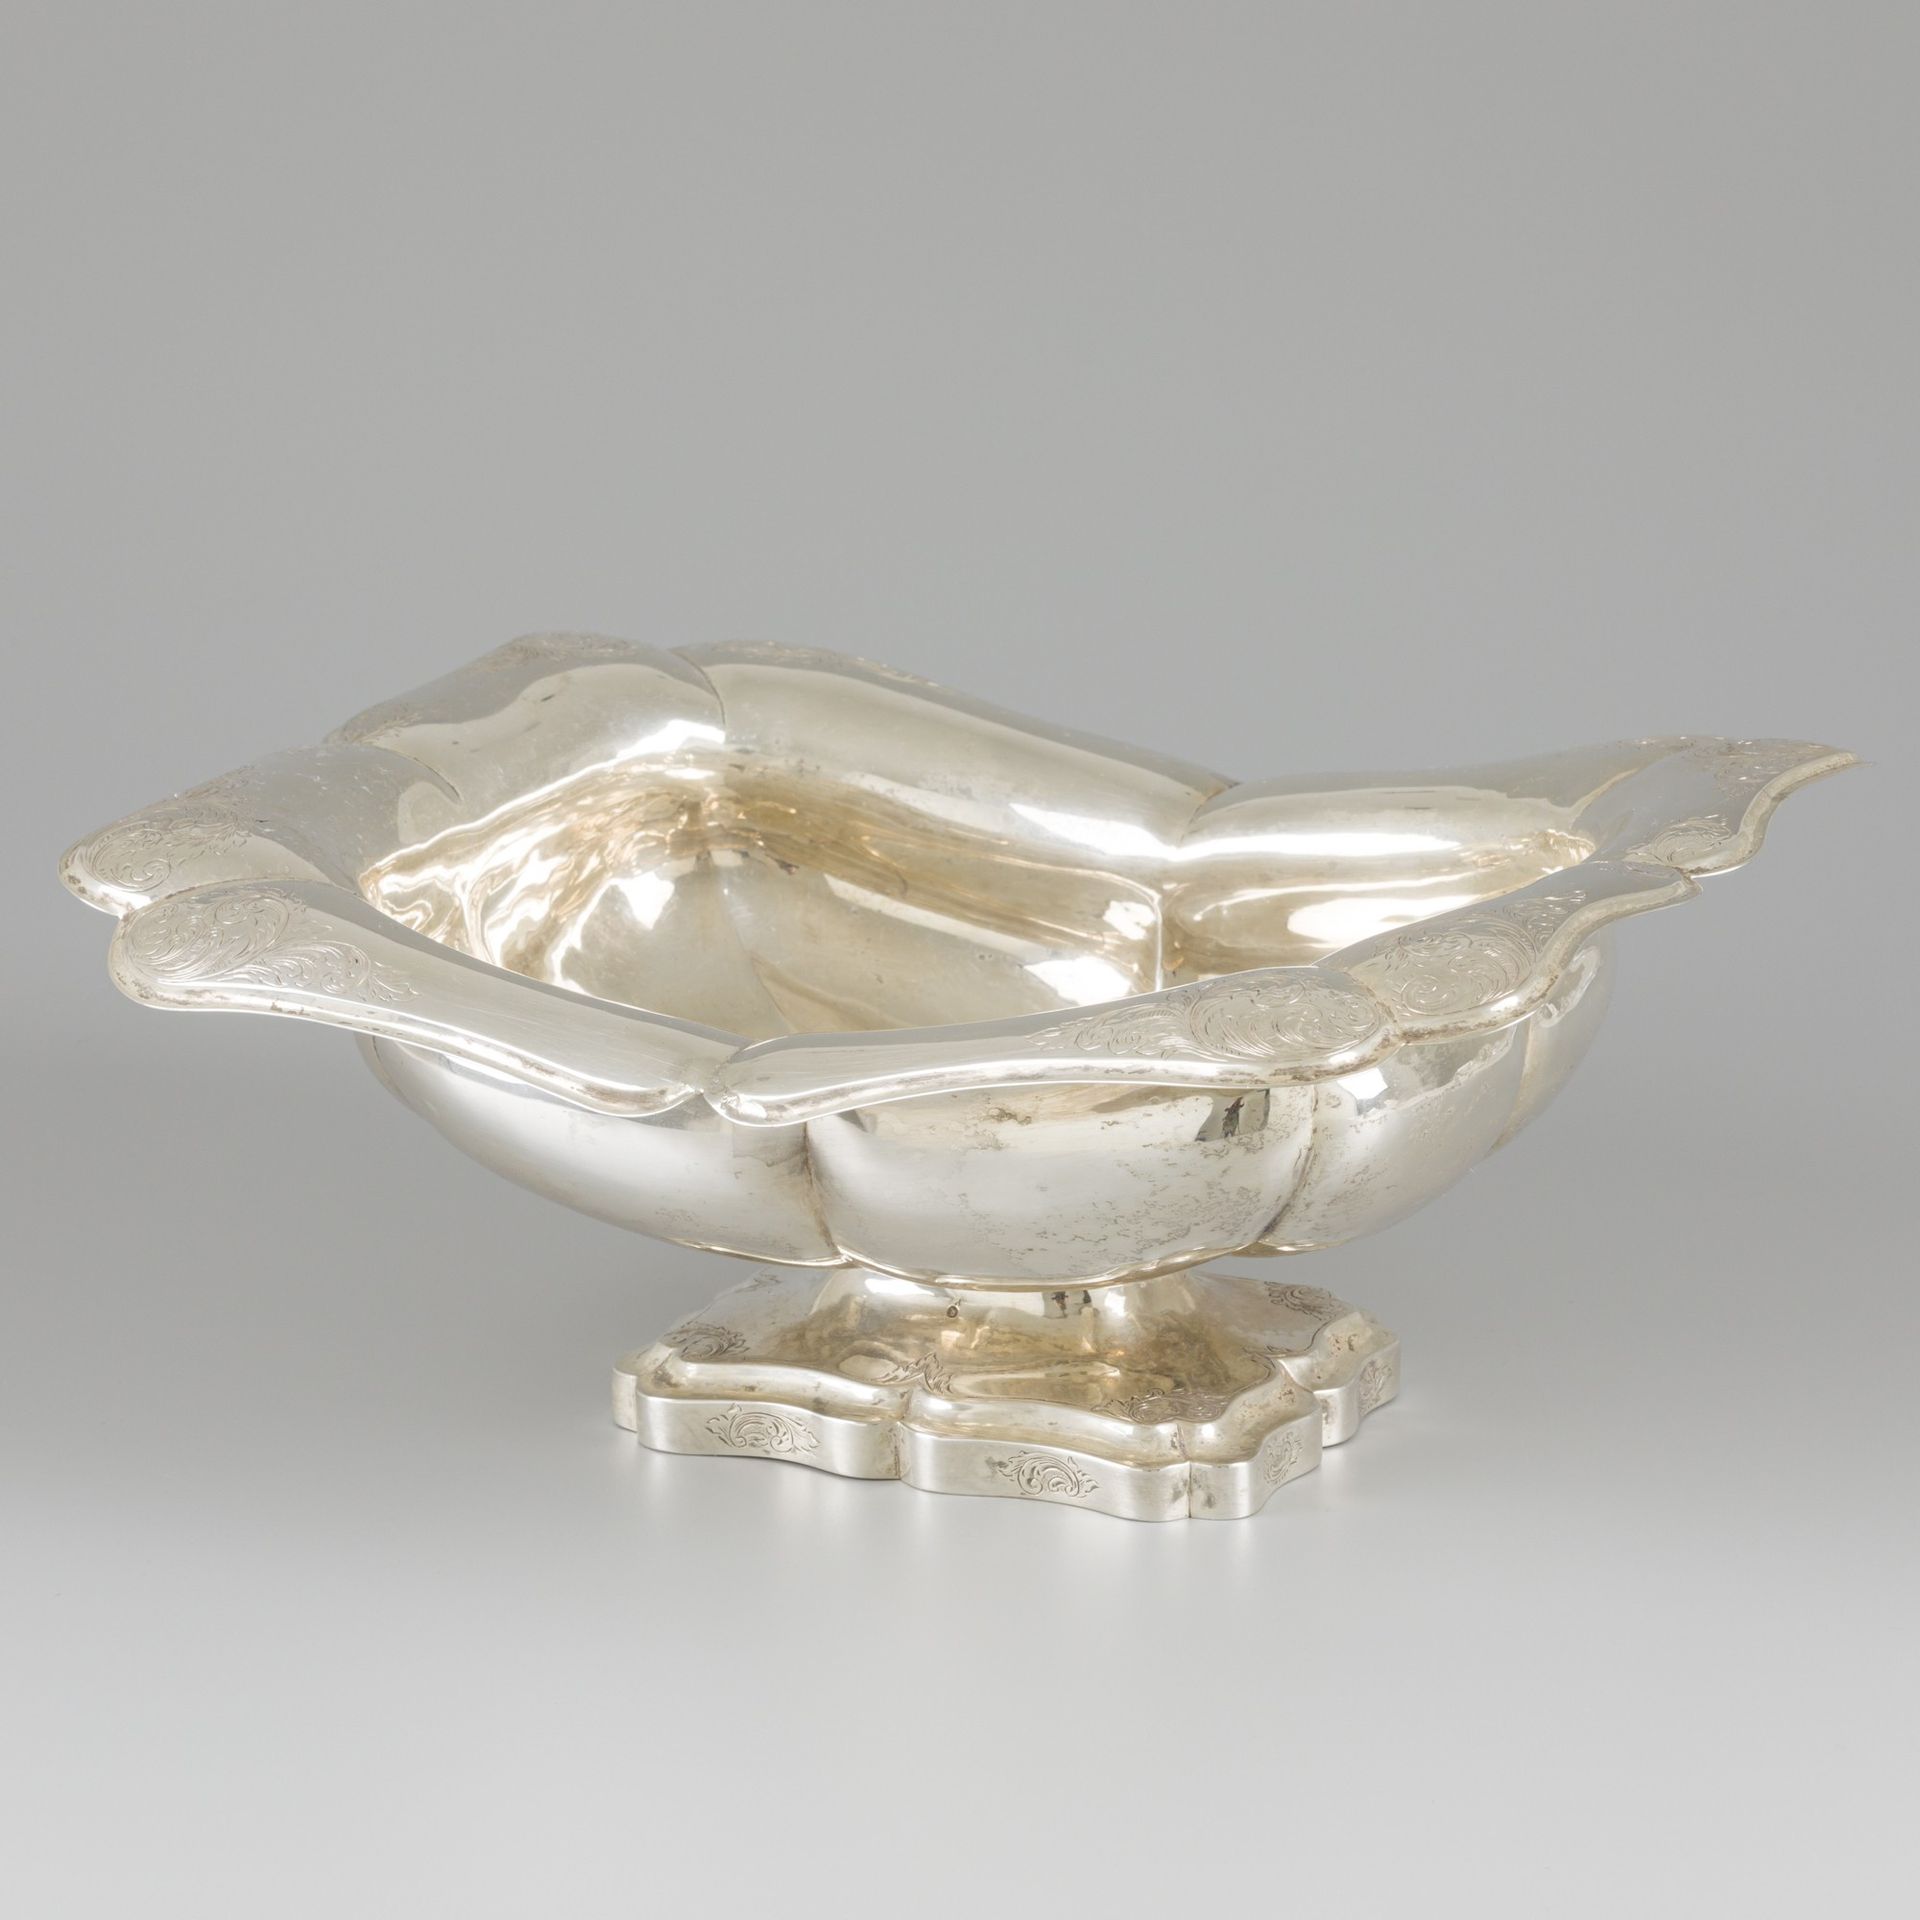 Fruit bowl (Amsterdam, Joost Even 1841-1880) silver. On foot, with lobed shapes &hellip;